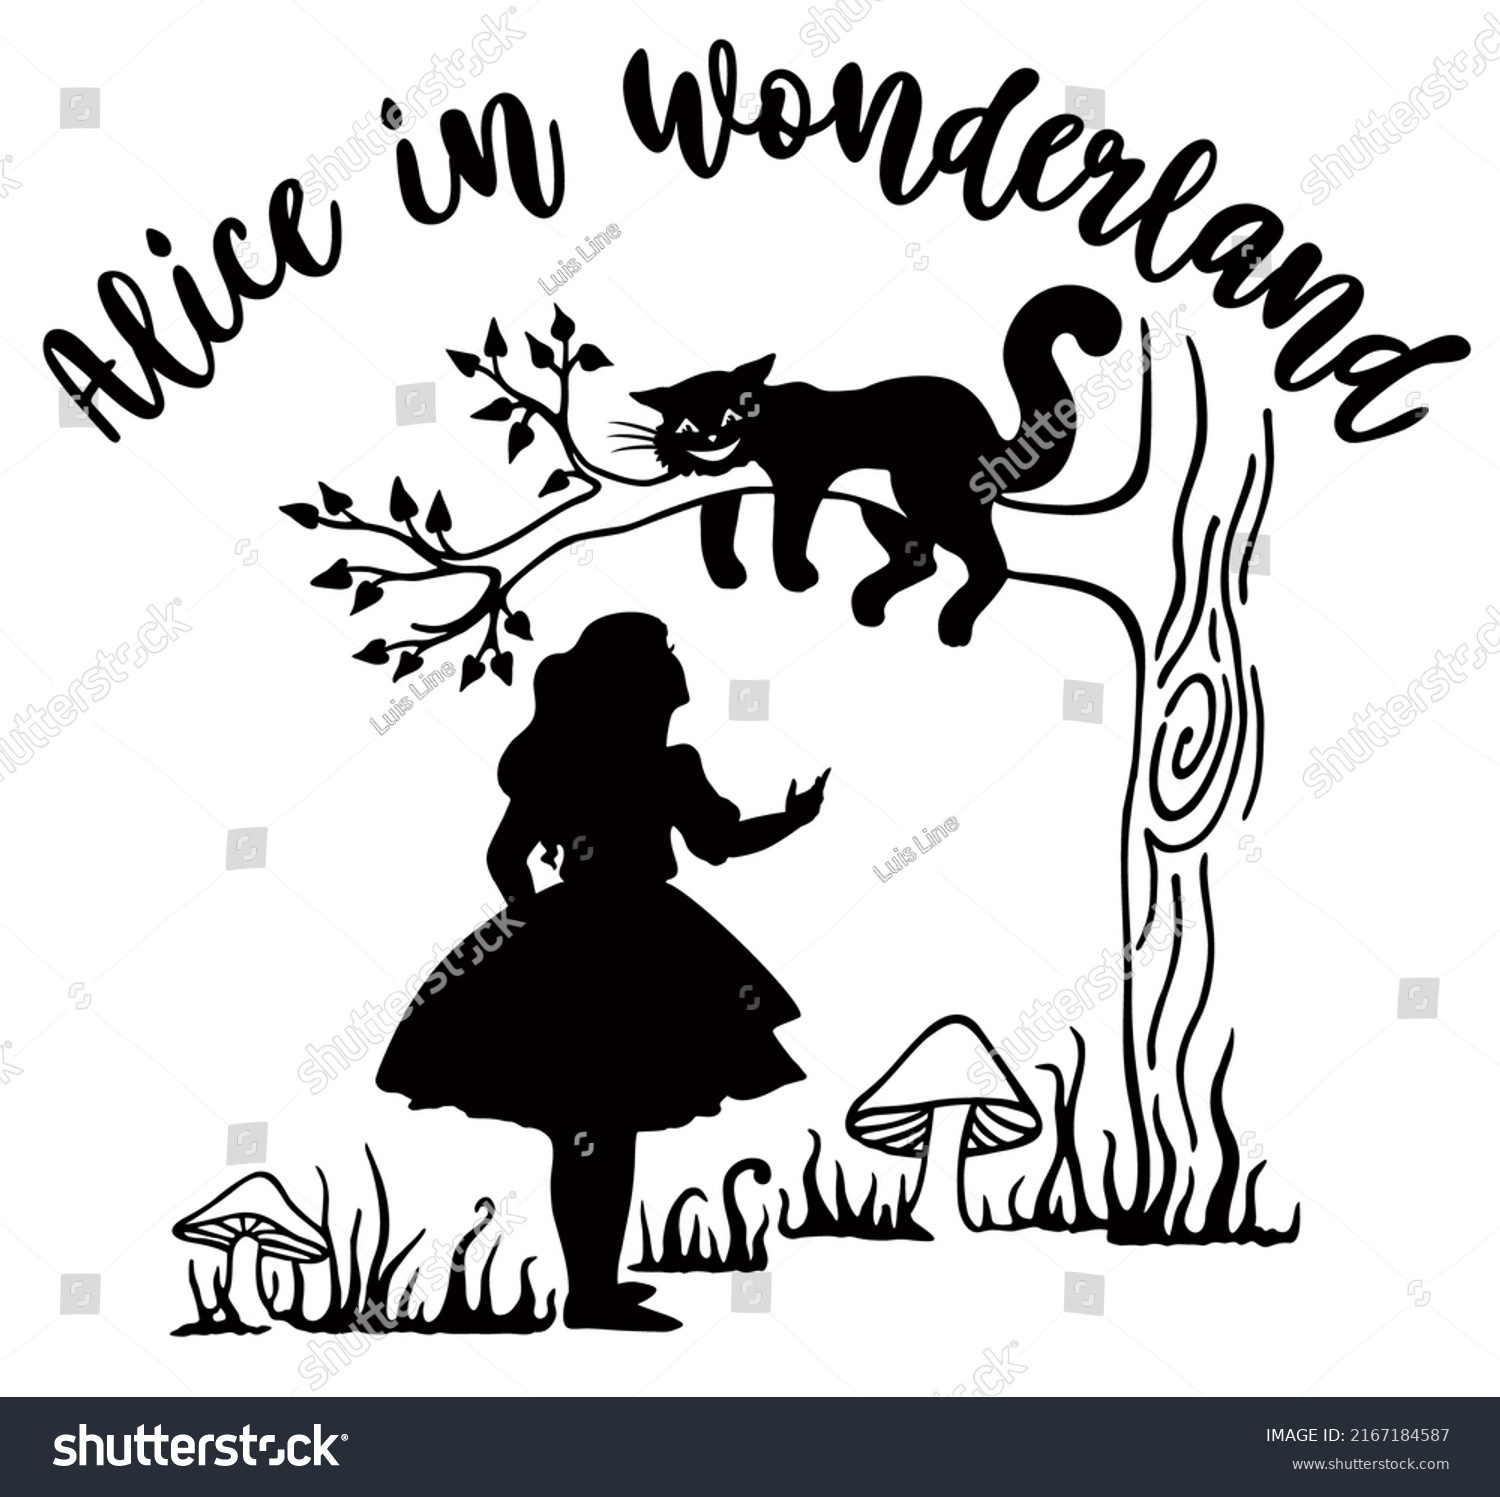 SVG of Alice in Wonderland. Cheshire cat on a tree. Black and white ink drawing. Sketch style illustration. Alice's Adventures in Wonderland. svg